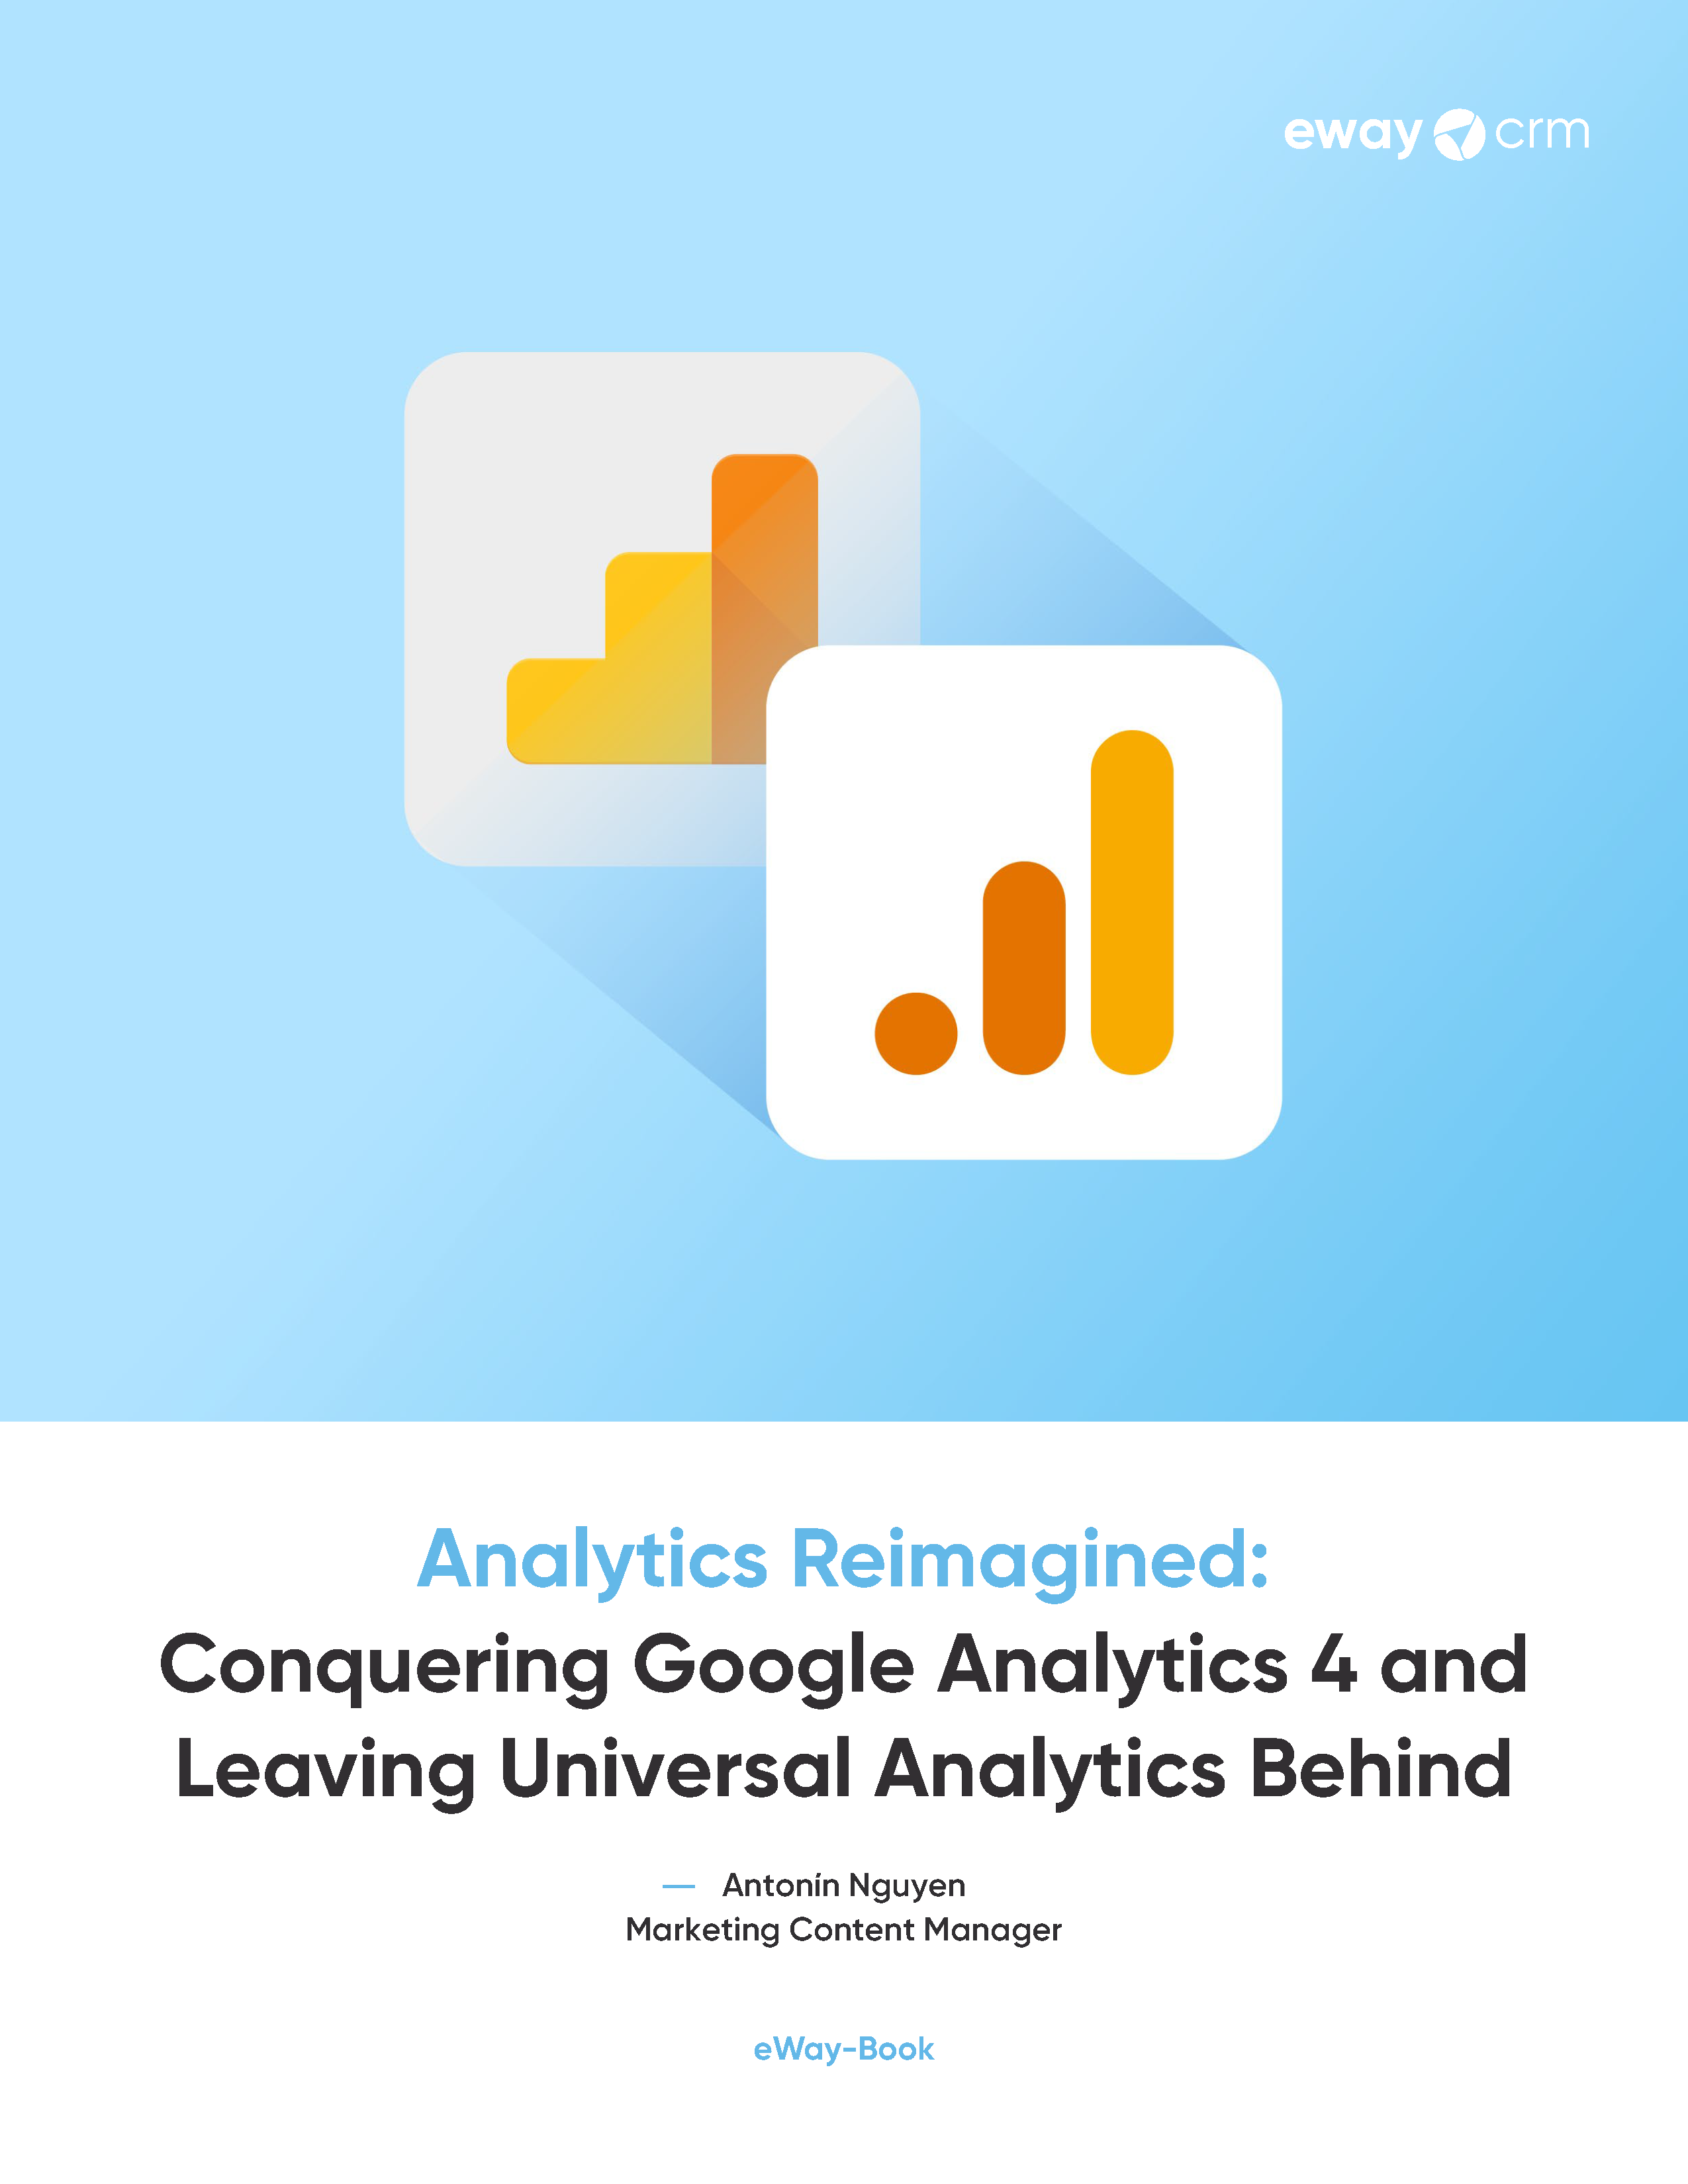 Conquering Google Analytics 4 and Leaving Universal Analytics Behind